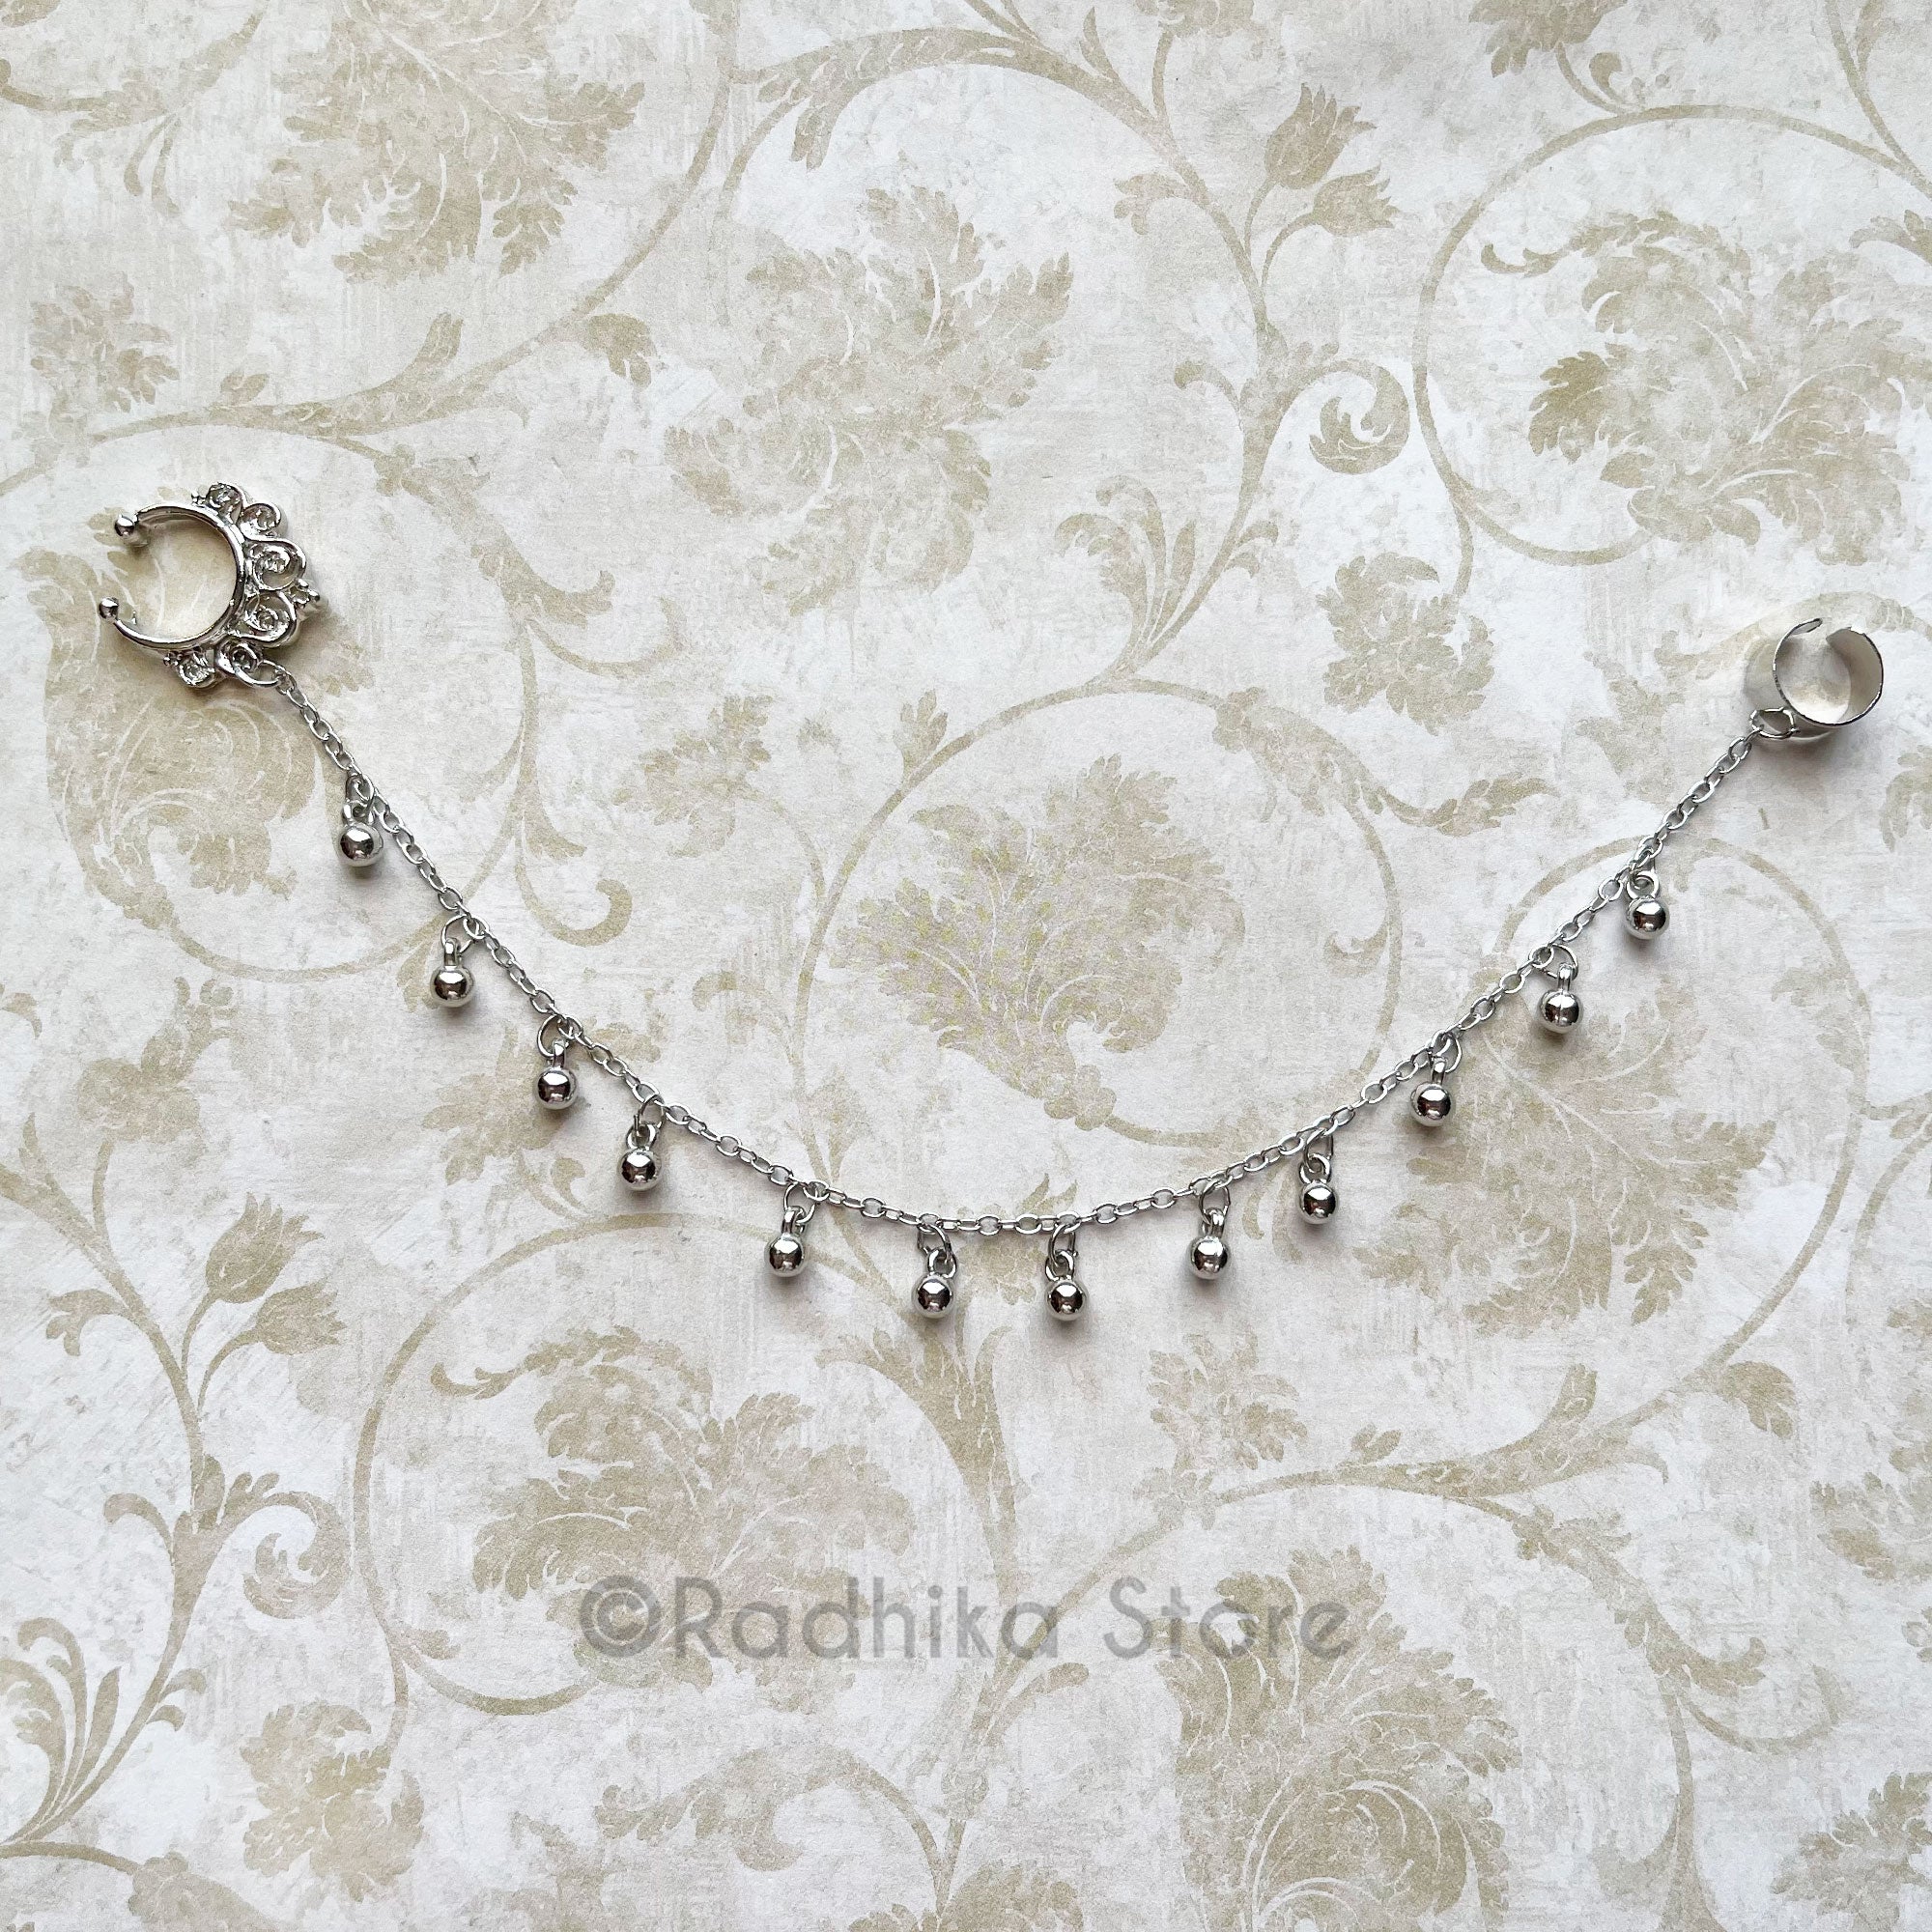 Silver Color Nose Ring and Chain- Size 7.5 Inch Inch